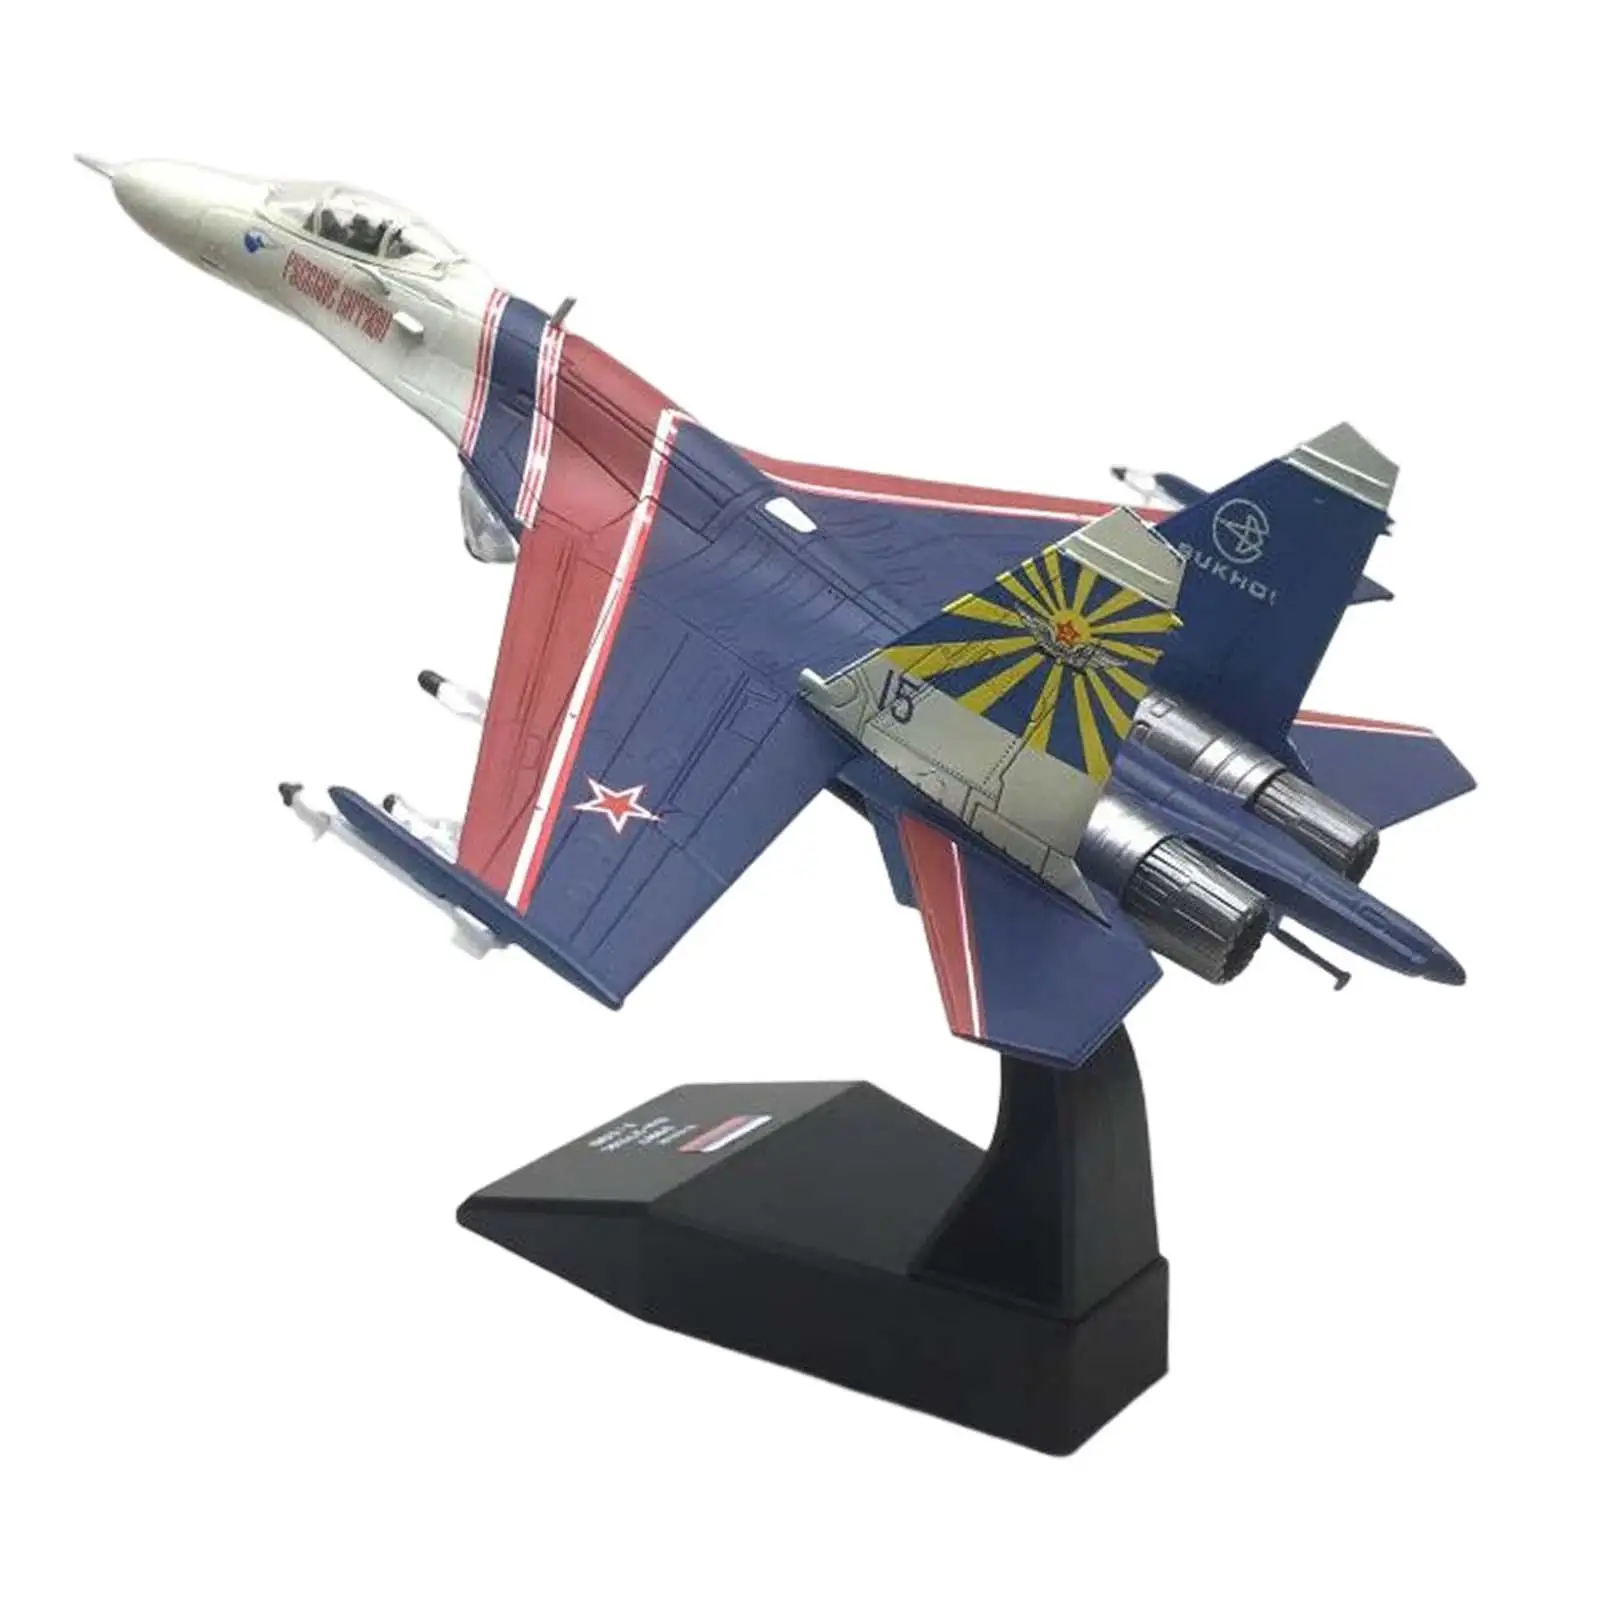 

Russian Plane Model Realistic Airplane Miniature Model Fighter Model for Living Room Office Shelf Birthday Gifts Decoration